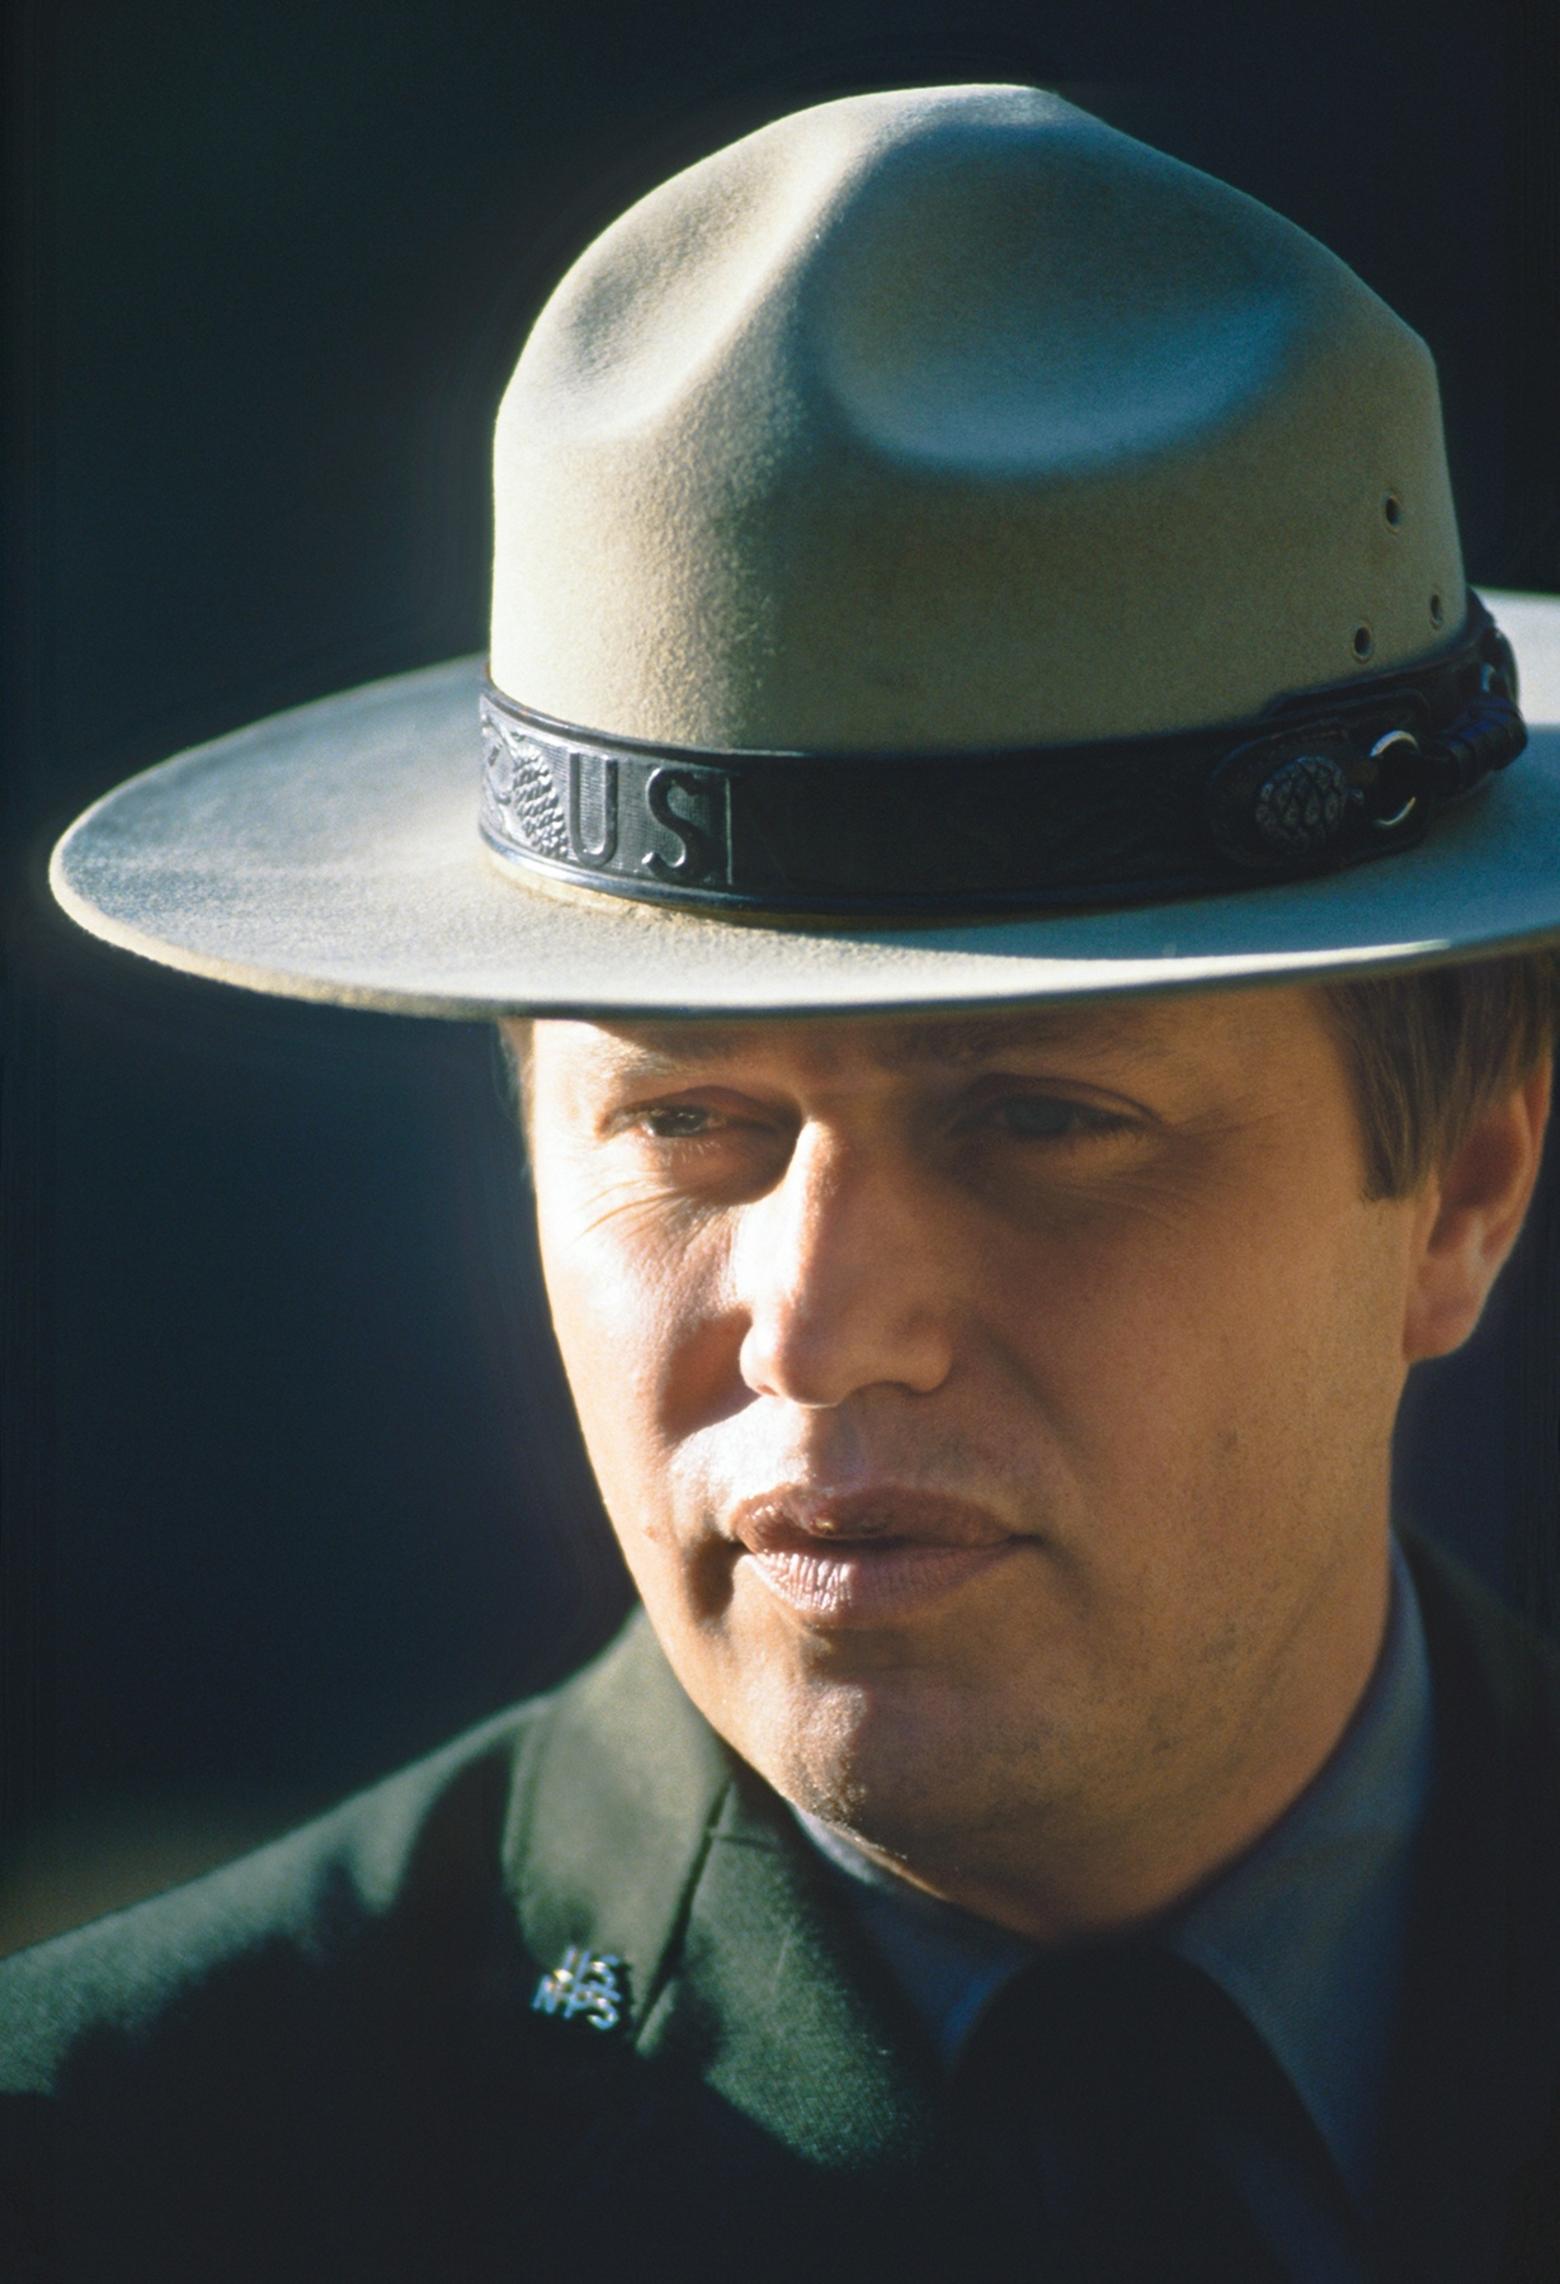 Mike Finley served as superintendent at Yellowstone National Park for seven years. Before that he was superintendent at Yosemite and Everglades national parks. In all, Finley's storied career with the Park Service lasted more than 30 years. Photo by Jay Mather